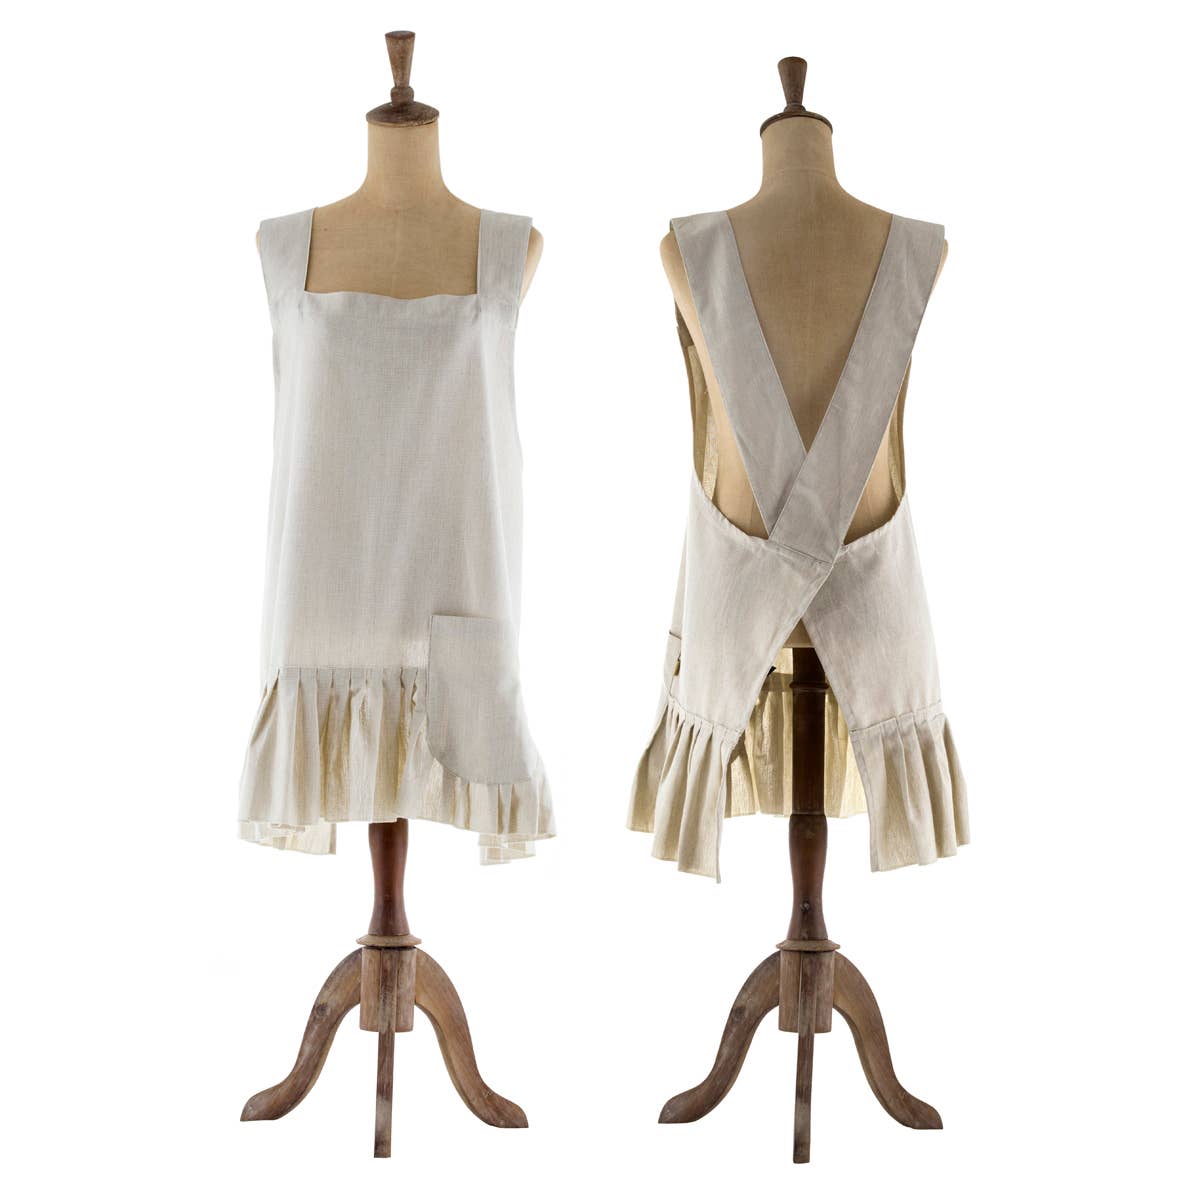 Pinafore Style Apron With Ruffled Hem - Taupe